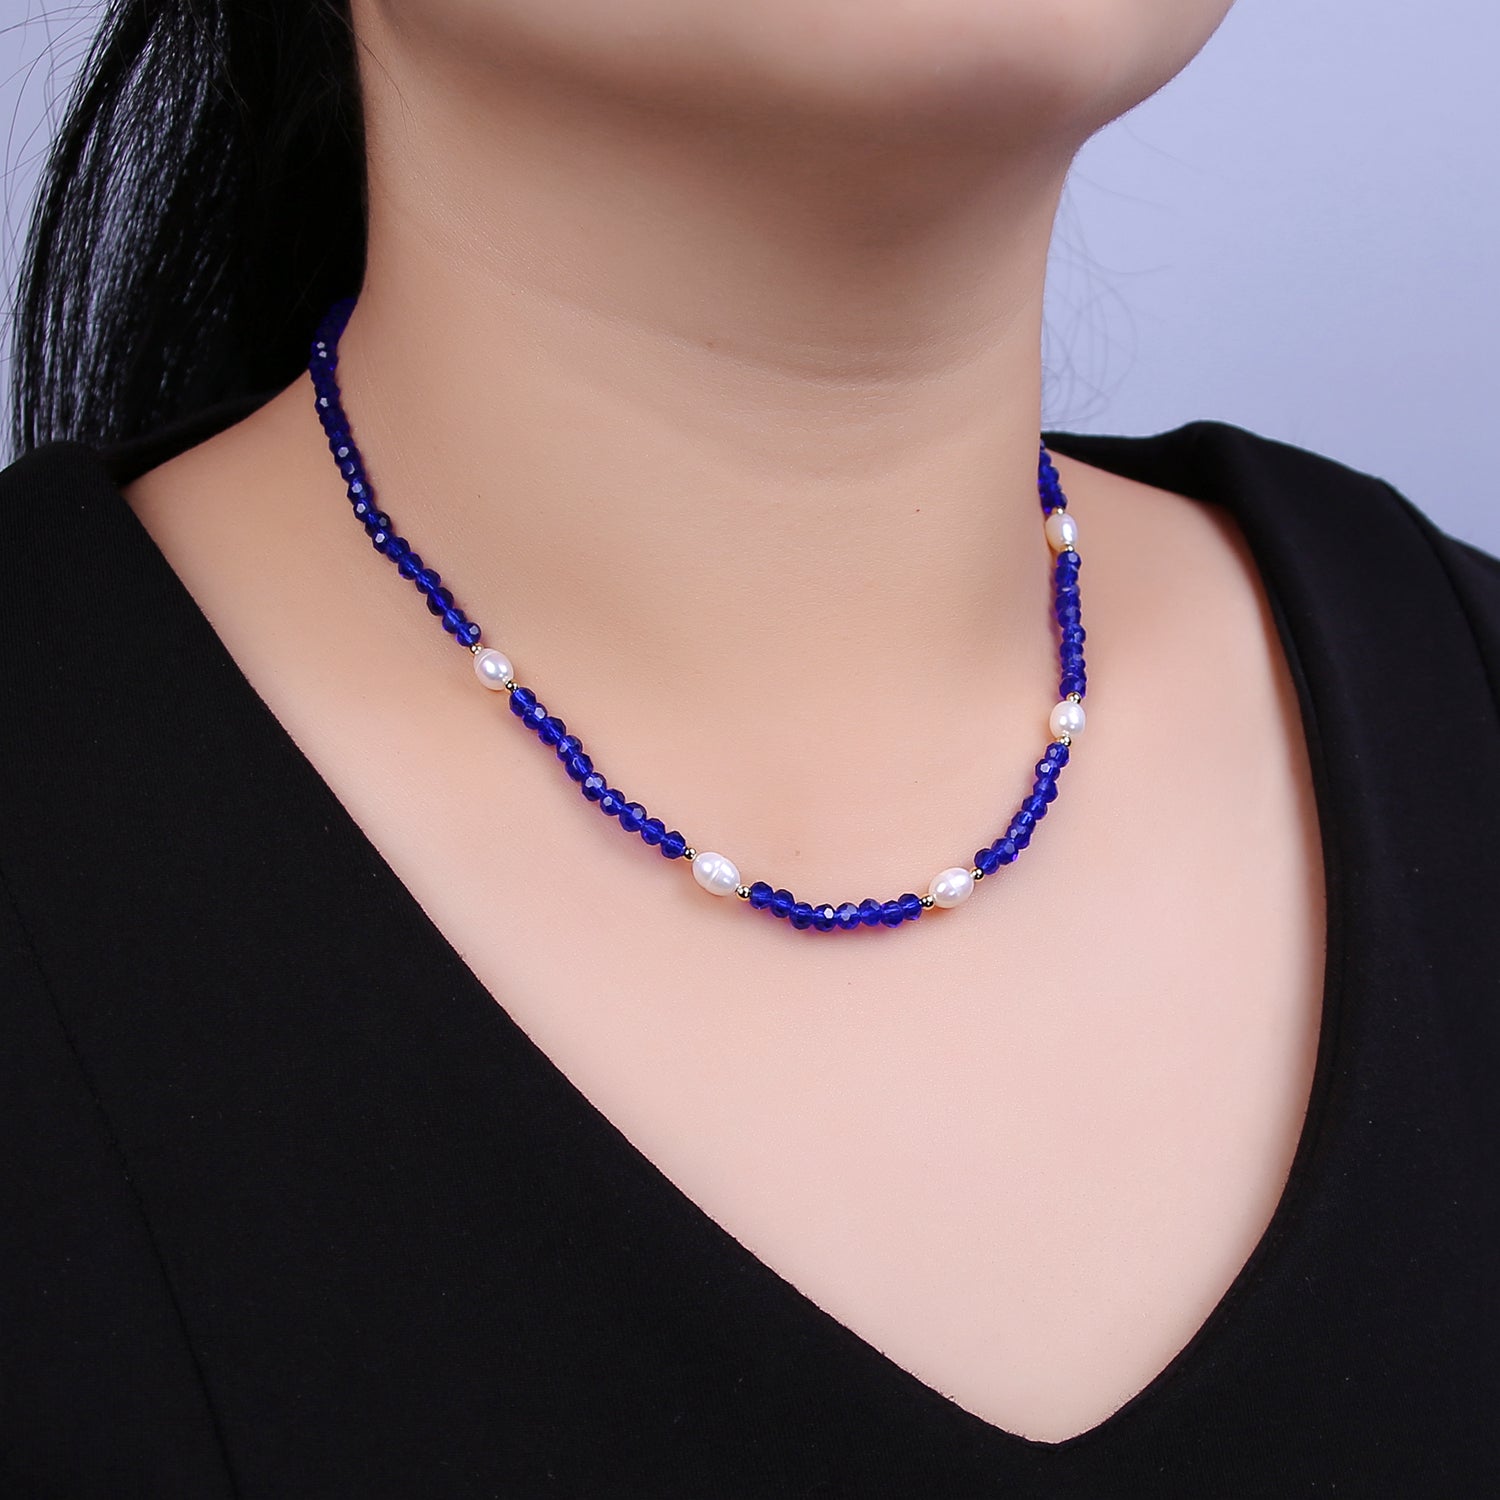 Pearl with Blue Glass Beaded Necklace, Dark Blue Faceted Rondell Beads Necklace WA-592 - DLUXCA